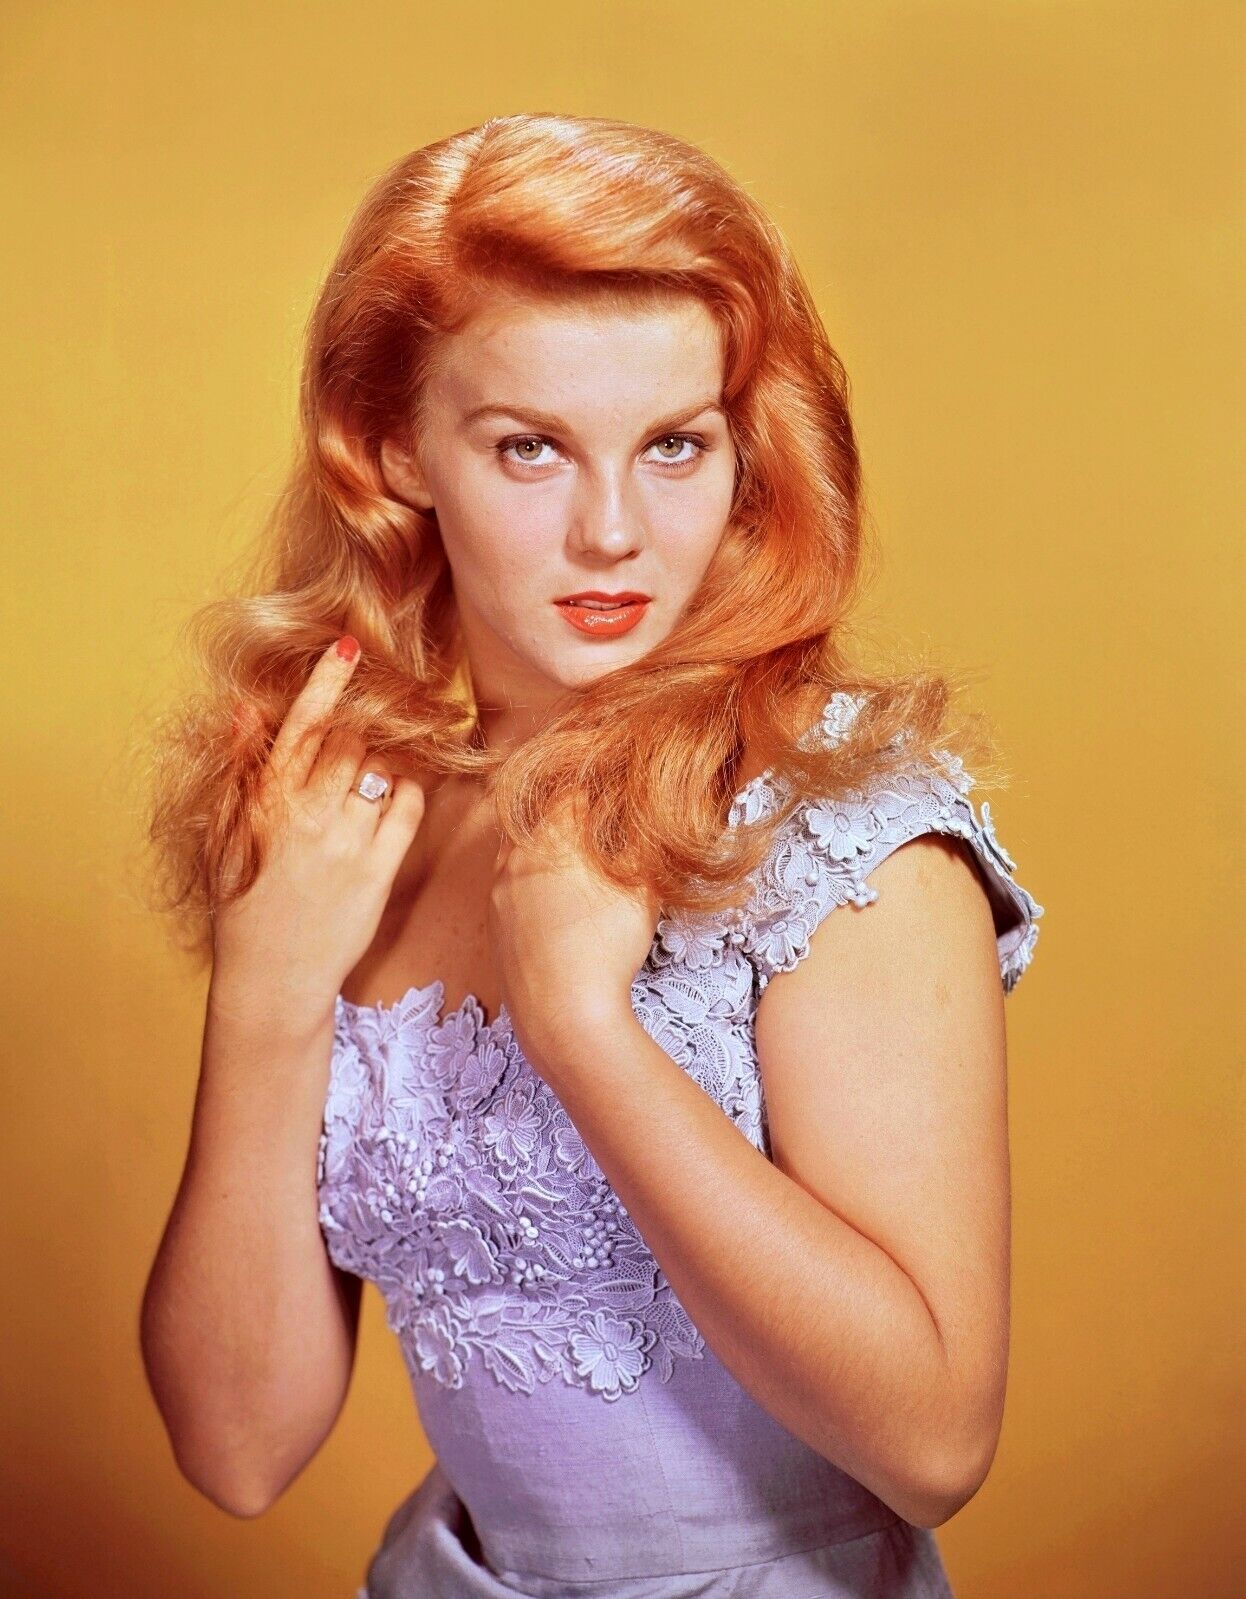 Only 879 Usd For Ann Margret Close Up Sexy Pinup 8x10 Glossy Photo Online At The Shop